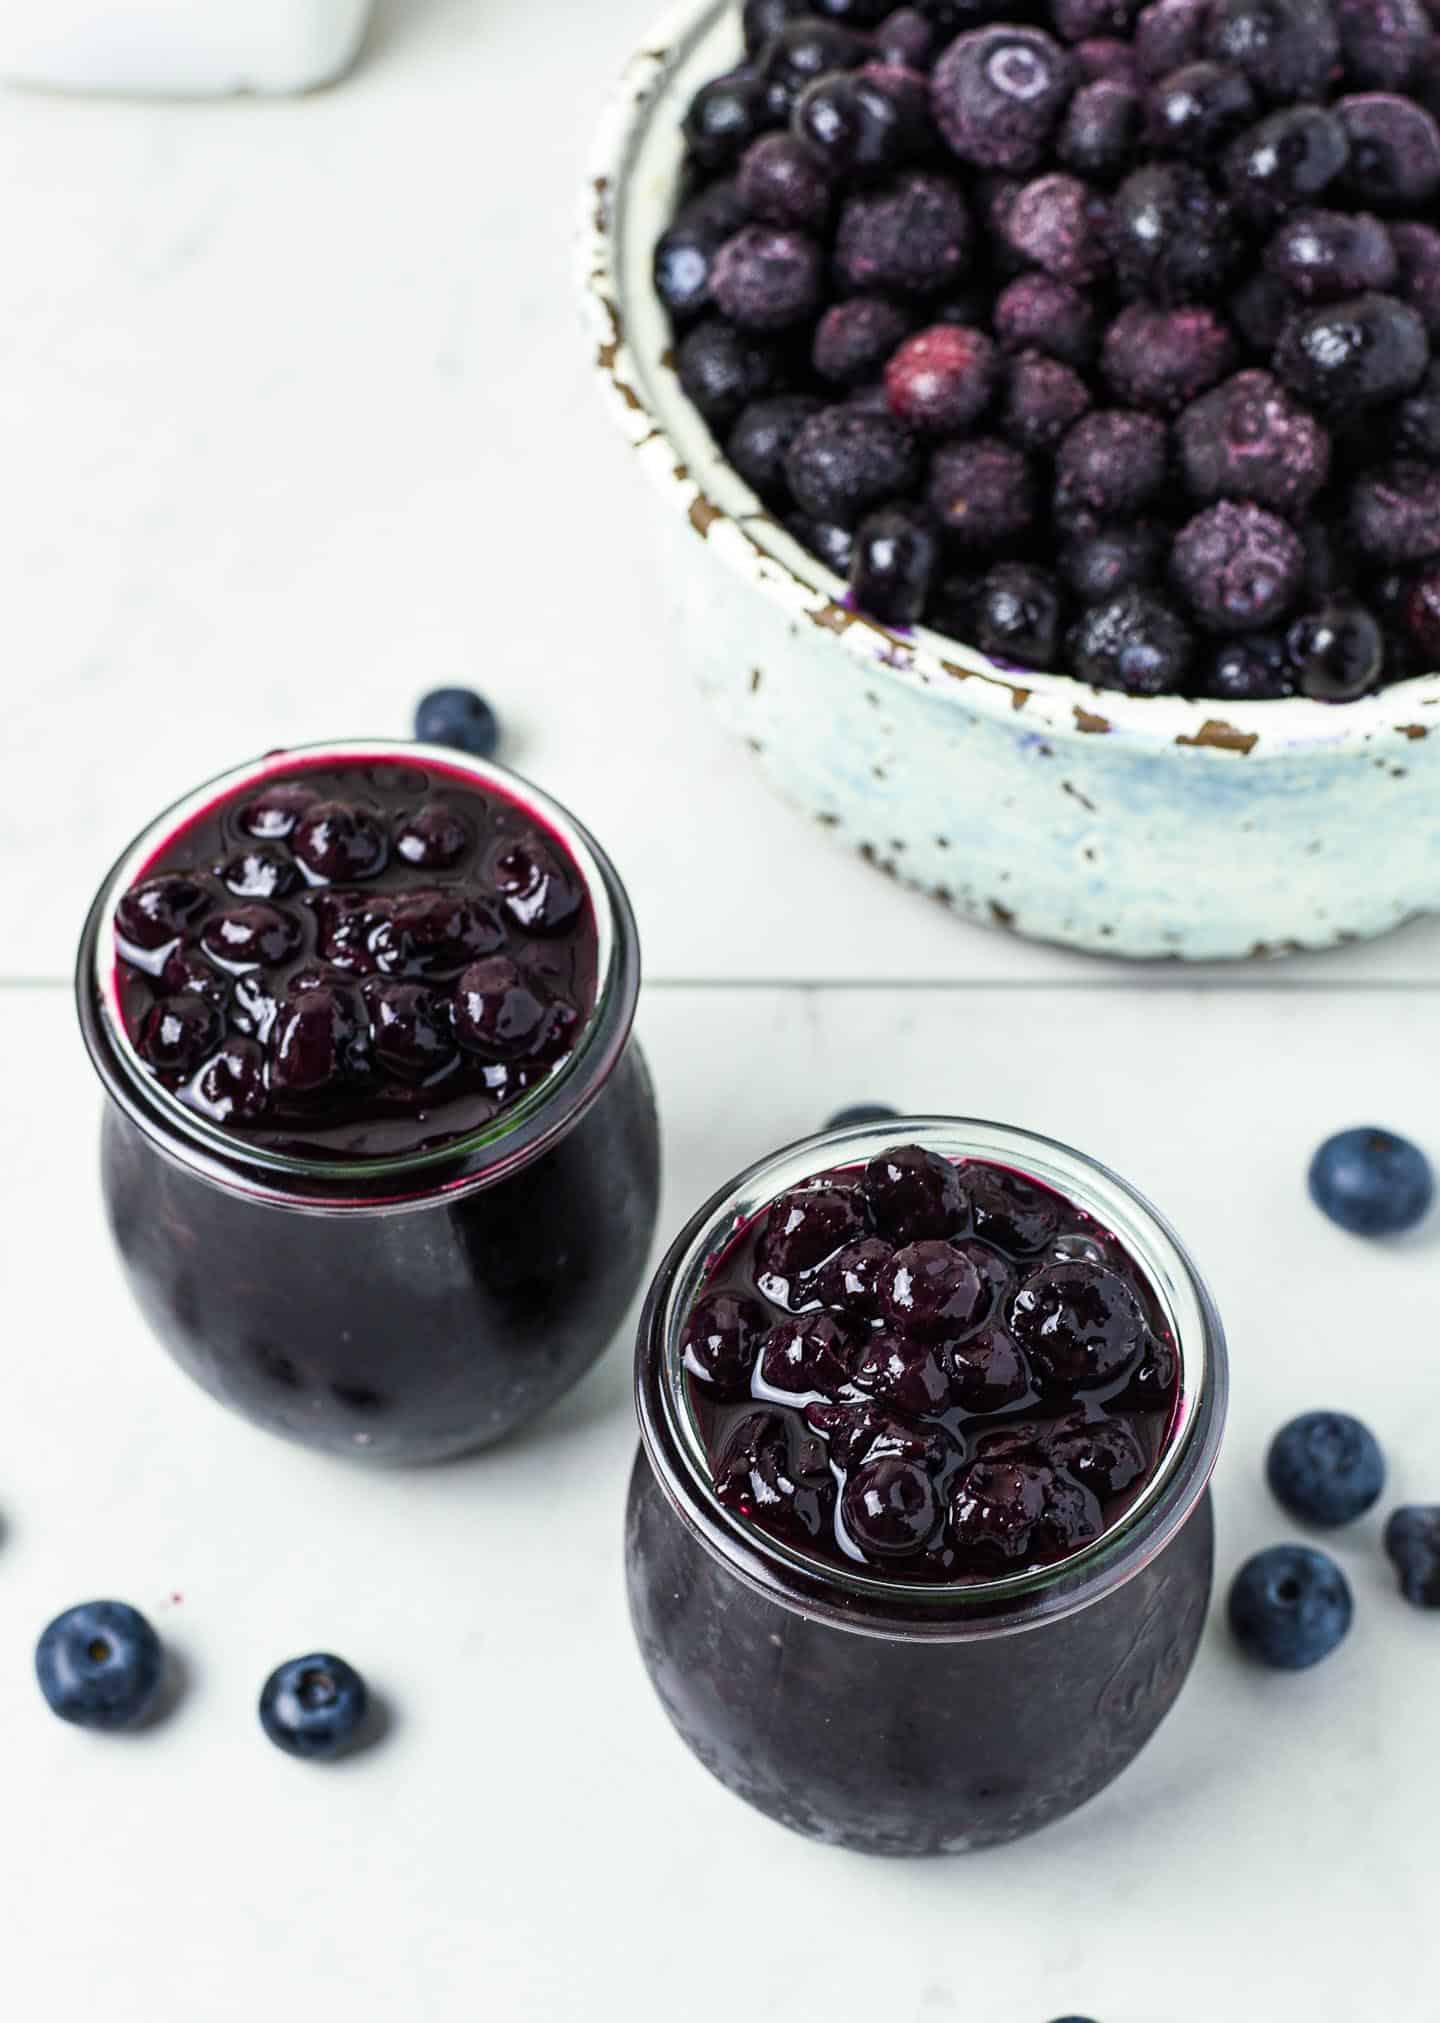 Enjoy this healthy Blueberry Compote on top of pancakes, waffles, fruit, or your favorite frozen dessert. It's so easy! All you need are 4 ingredients and less than 20 minutes to make this amazing blueberry sauce recipe.